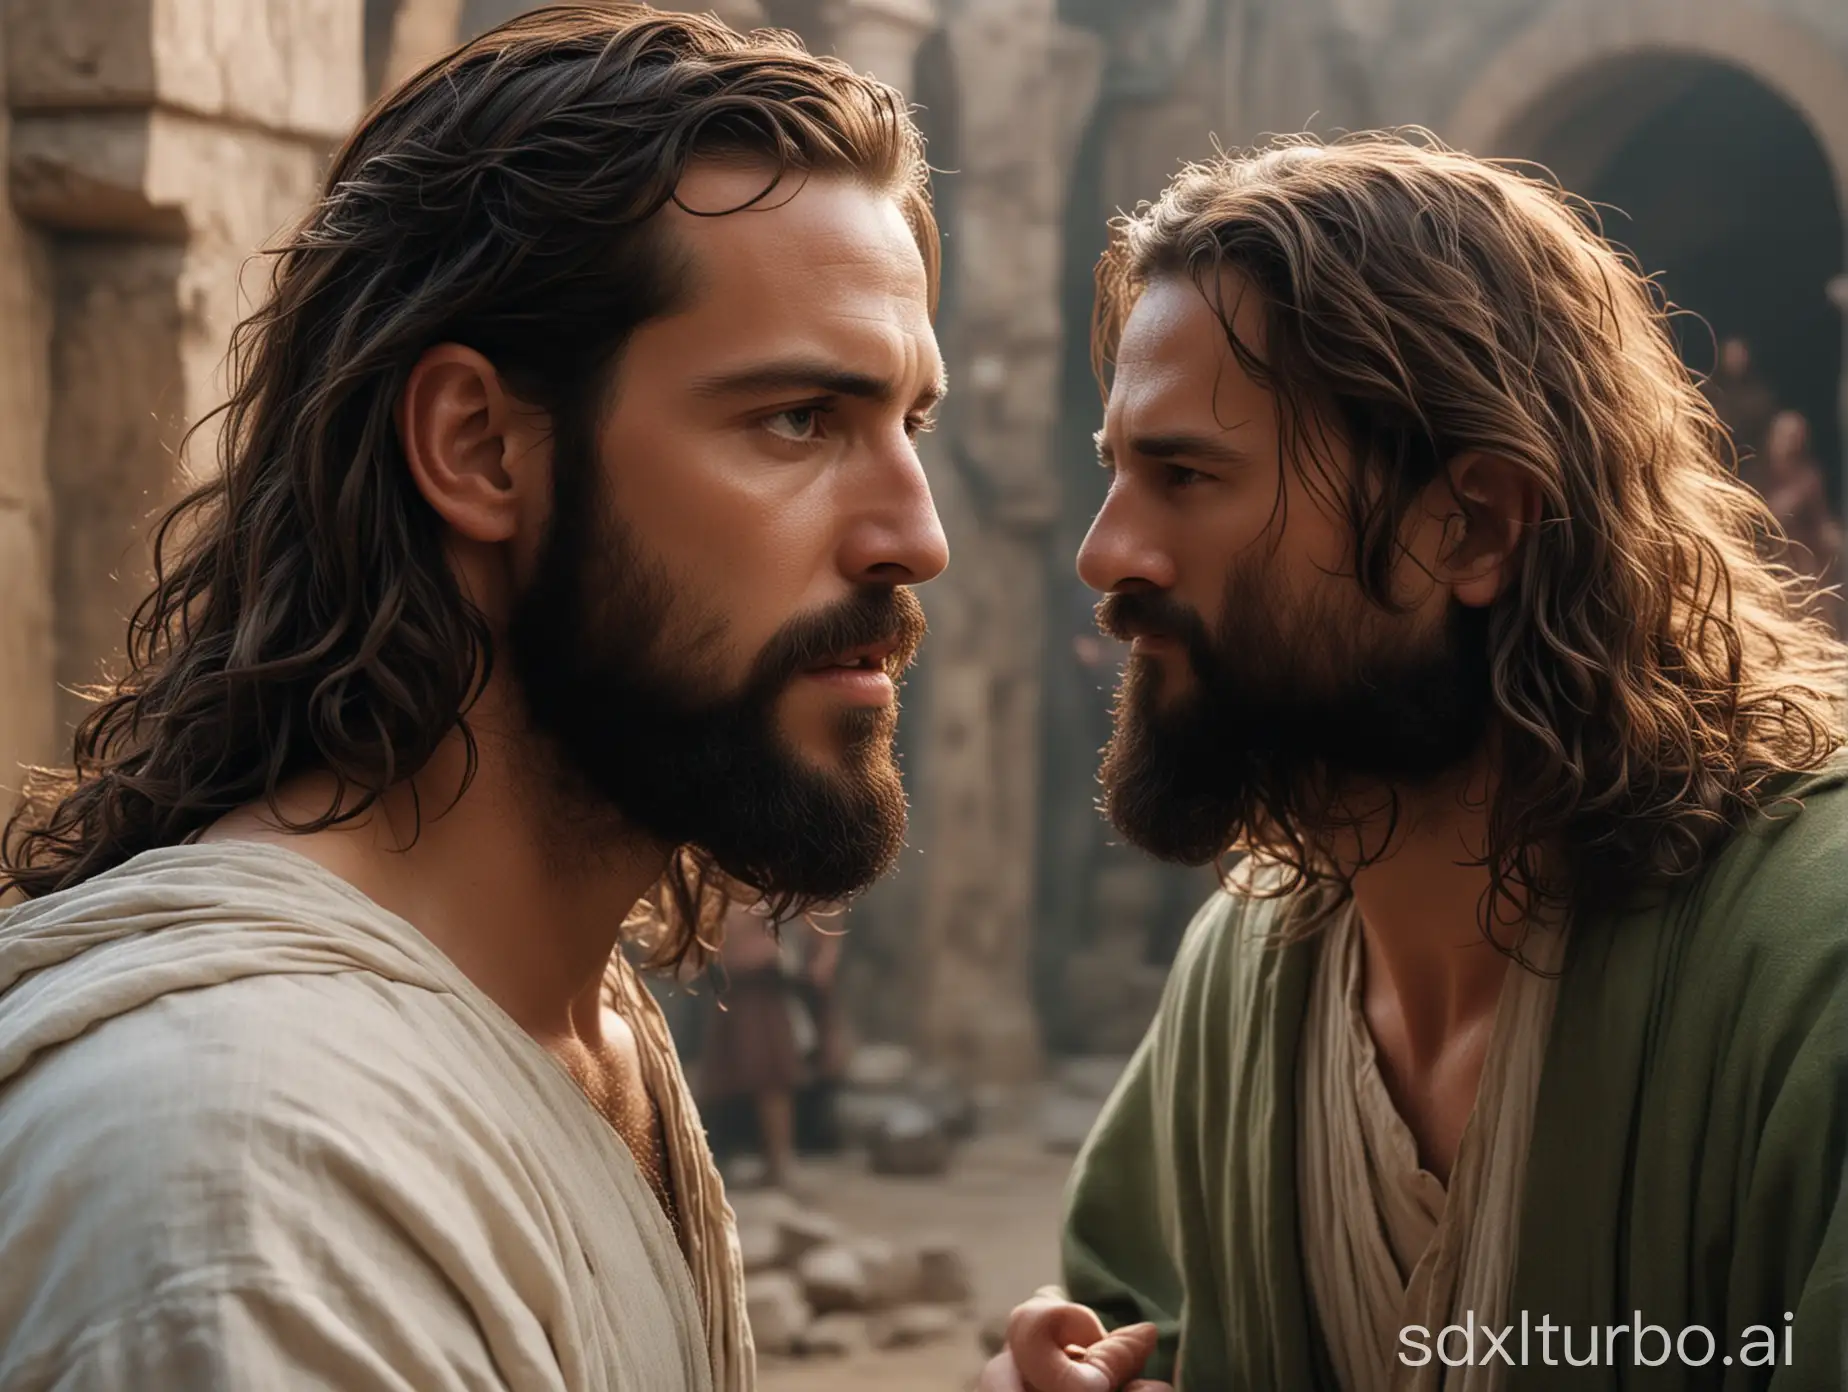 In this image, we see a scene from the movie "The Passion of the Christ". The focus is on two characters: one with long hair and a beard, dressed in a white robe, and another with shorter hair and a beard, wearing a green tunic. They are engaged in what appears to be an intense conversation or confrontation. In the background, other figures can be seen, contributing to the dramatic atmosphere of the scene., Cinematic lighting, Unreal Engine 5, Cinematic, Color Grading, Editorial Photography, Photography, Photoshoot, Shot on 70mm lense, Depth of Field, DOF, Tilt Blur, Shutter Speed 1/1000, F/22, White Balance, 32k, Super-Resolution, Megapixel, ProPhoto RGB, VR, tall, epic, artgerm, alex ross, Halfrear Lighting, Backlight, Natural Lighting, Incandescent, Optical Fiber, Moody Lighting, Cinematic Lighting, Studio Lighting, Soft Lighting, Volumetric, Contre-Jour, dark Lighting, Accent Lighting, Global Illumination, Screen Space Global Illumination, Ray Tracing Global Illumination, Red Rim light, cool color grading 45%,